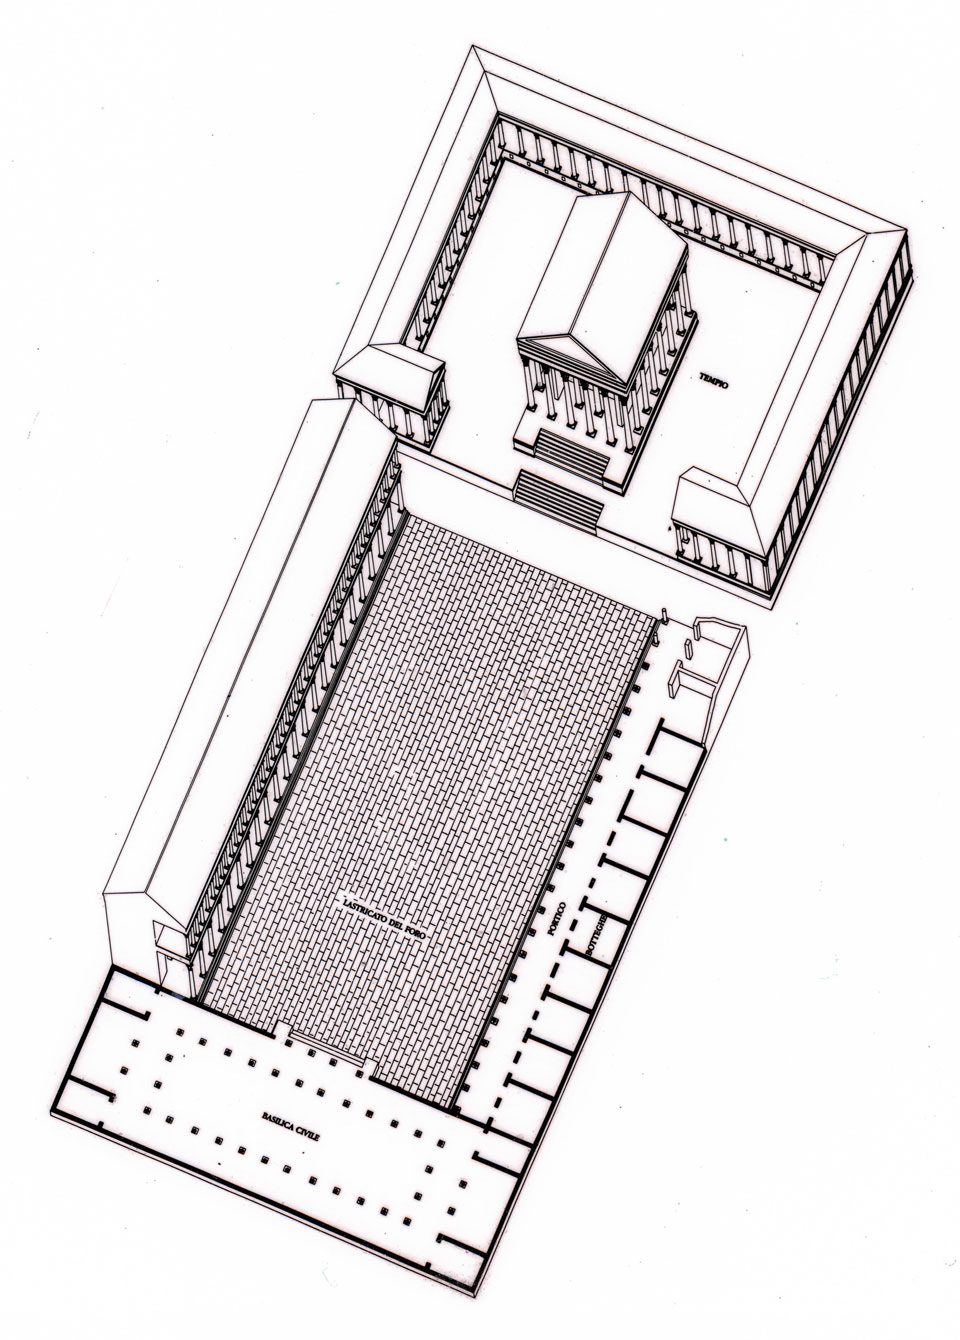 Hypothetical reconstruction (Graphic representation by Loretta Zega, Archive of the Veneto Regional Board for Archaeological Heritage)